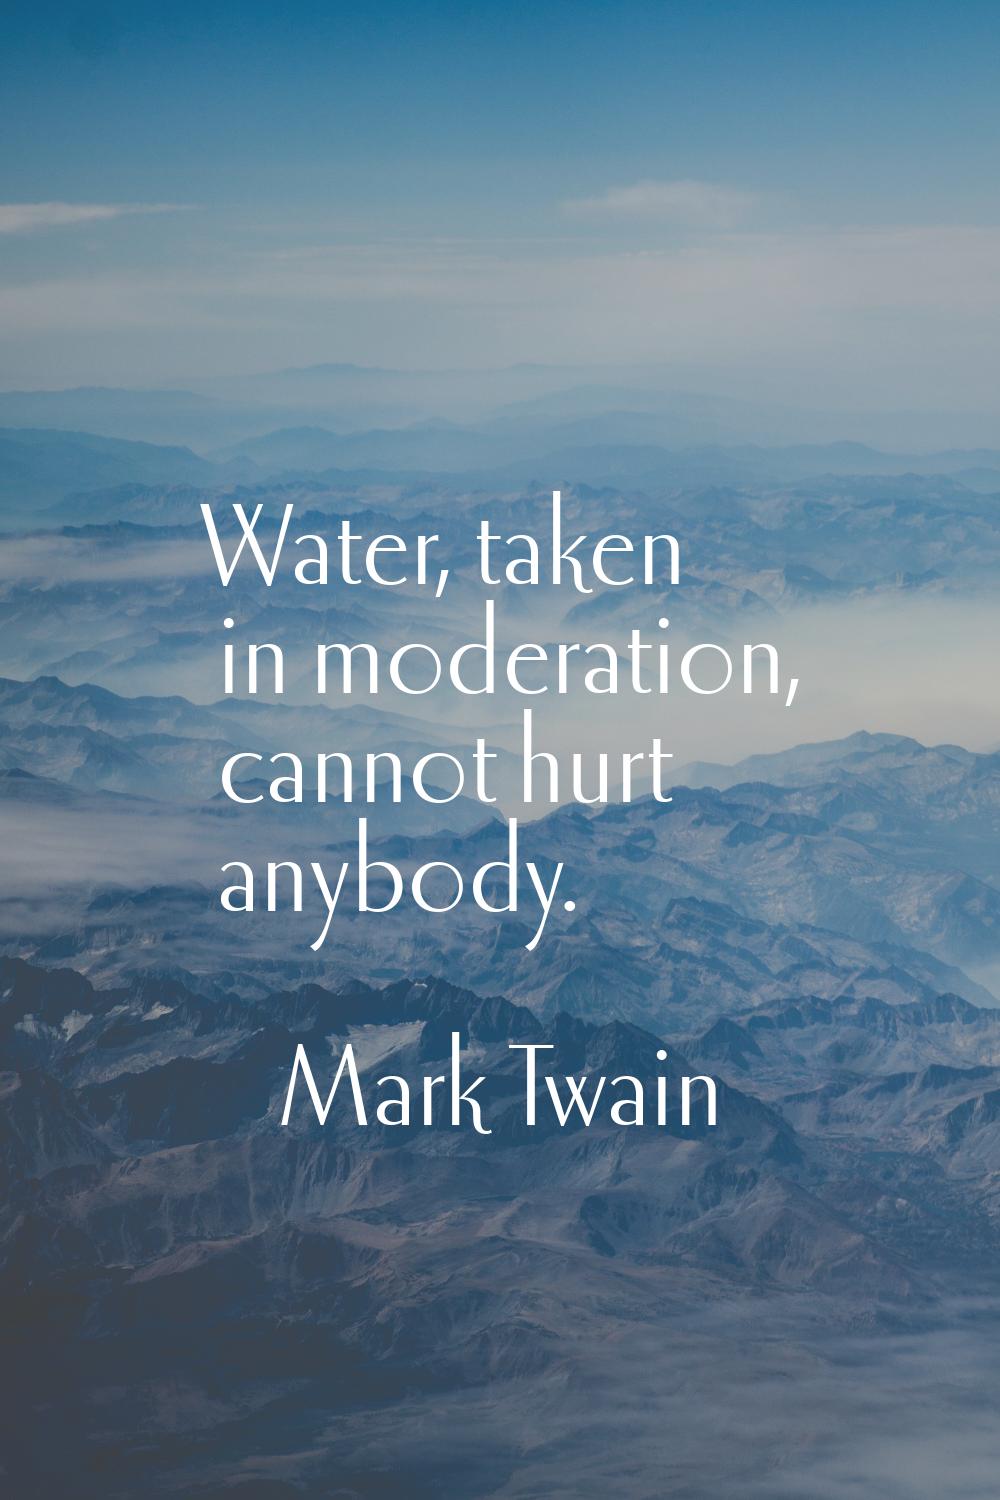 Water, taken in moderation, cannot hurt anybody.